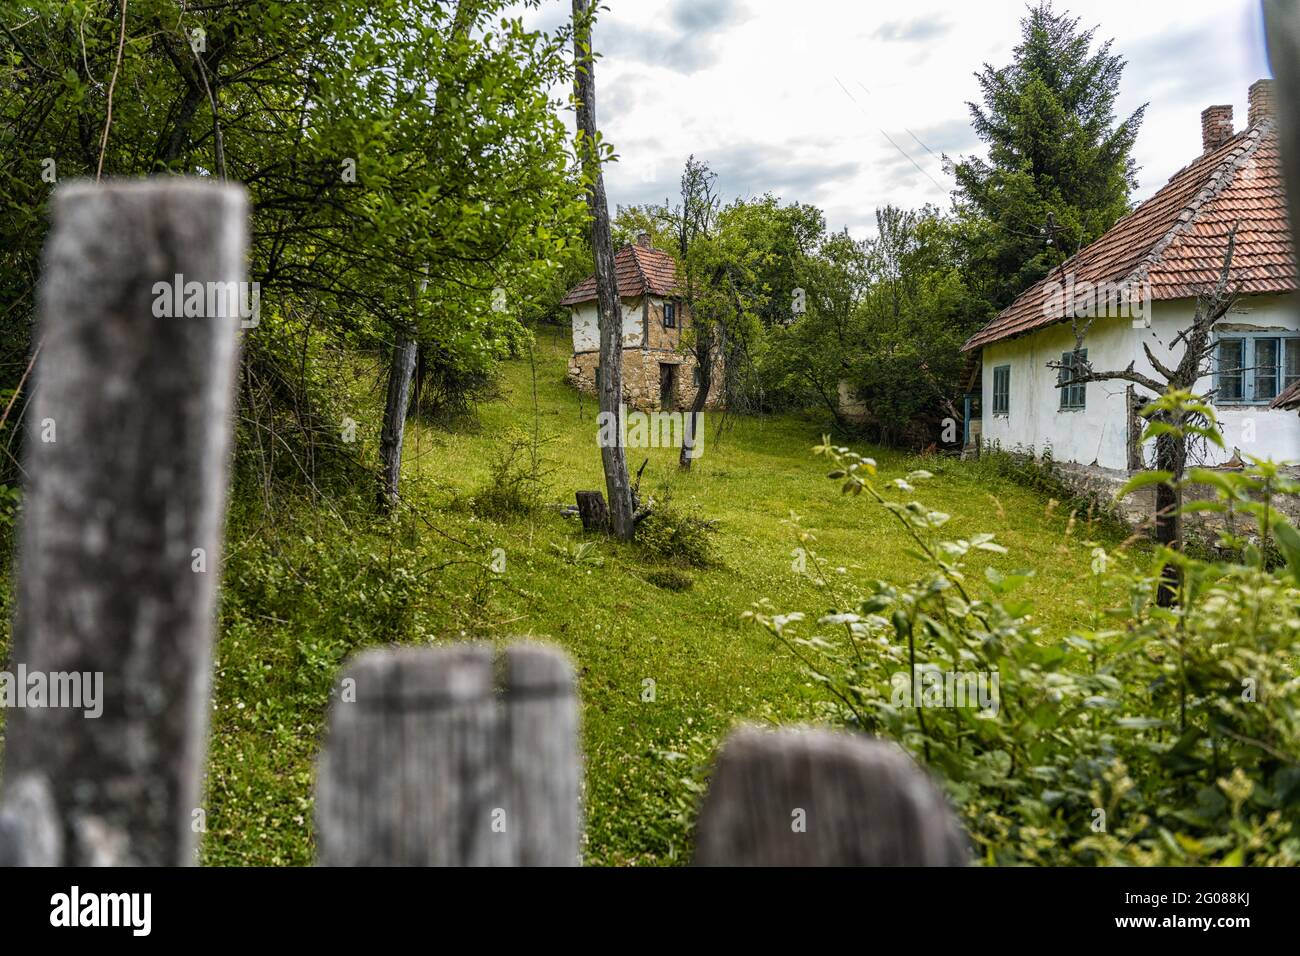 Abandoned old house and yard in the countryside Stock Photo